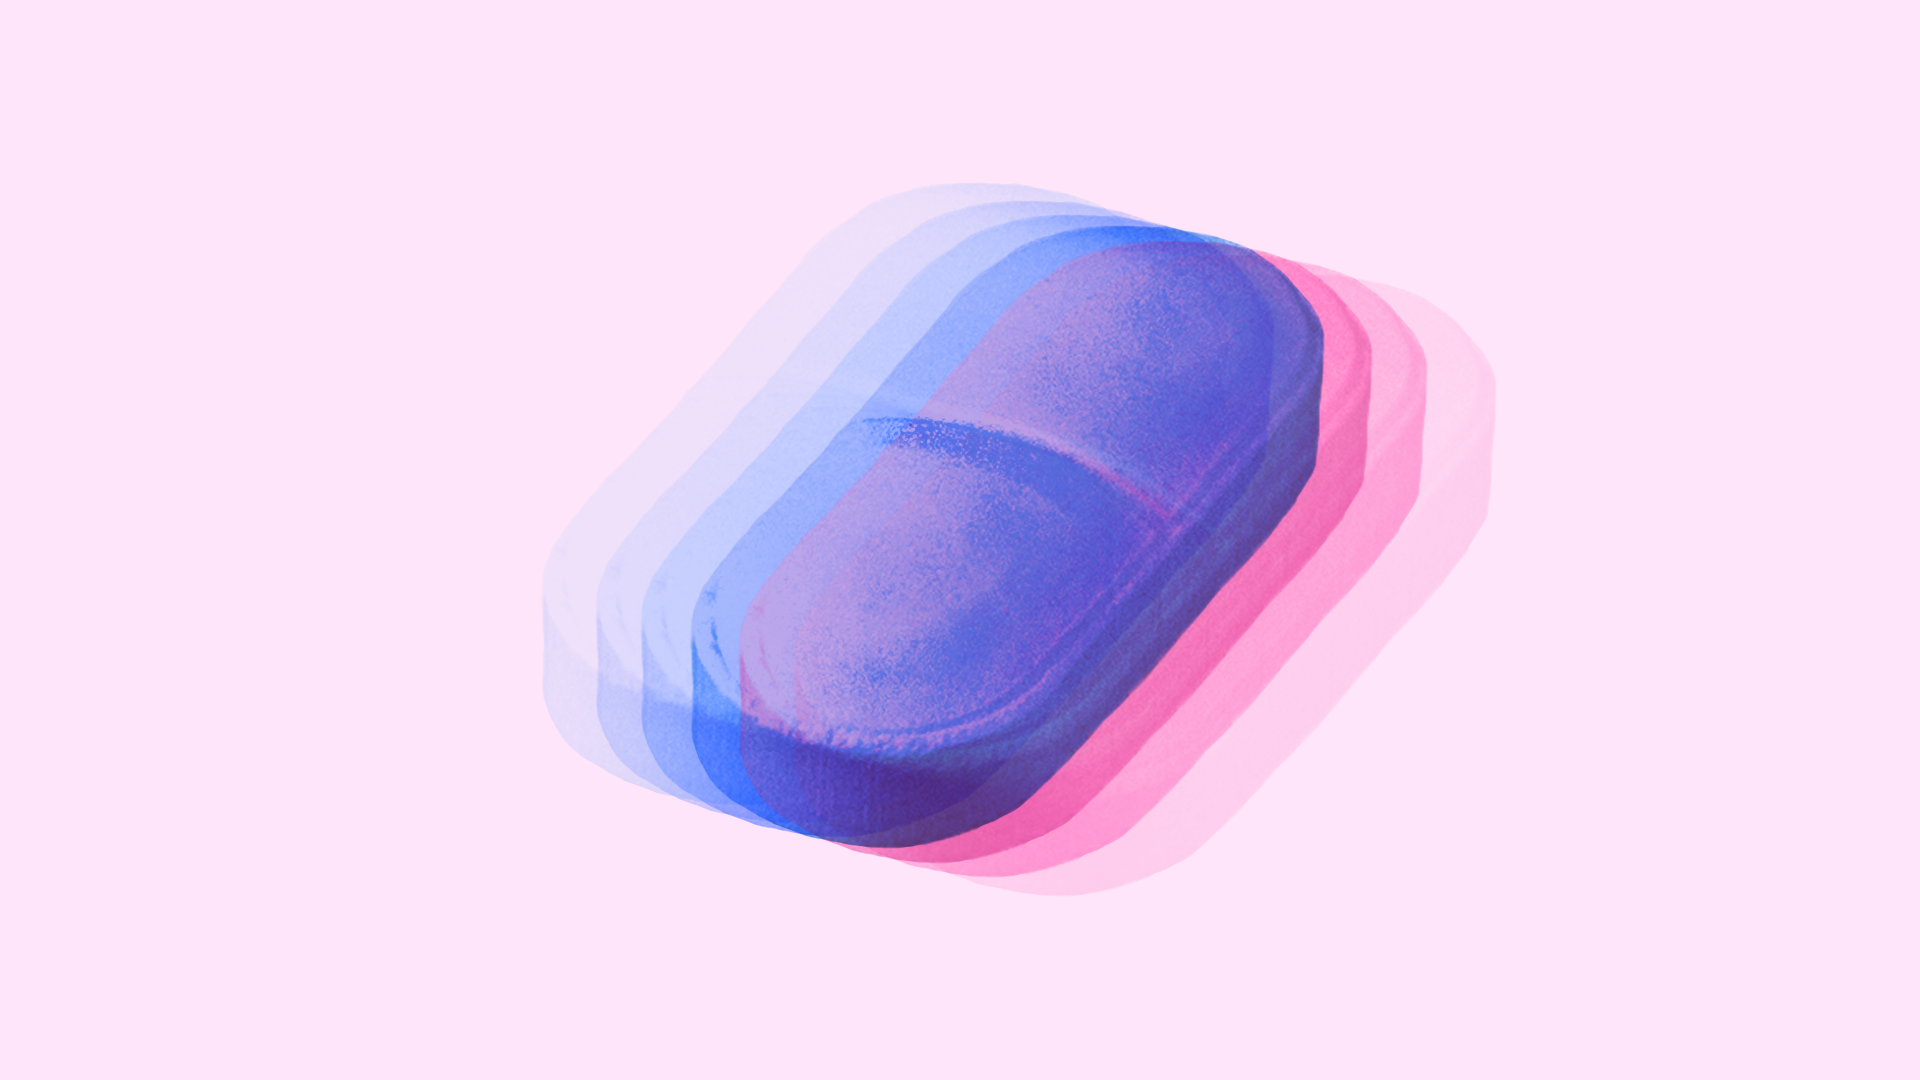 A blurred illustration of a pill.